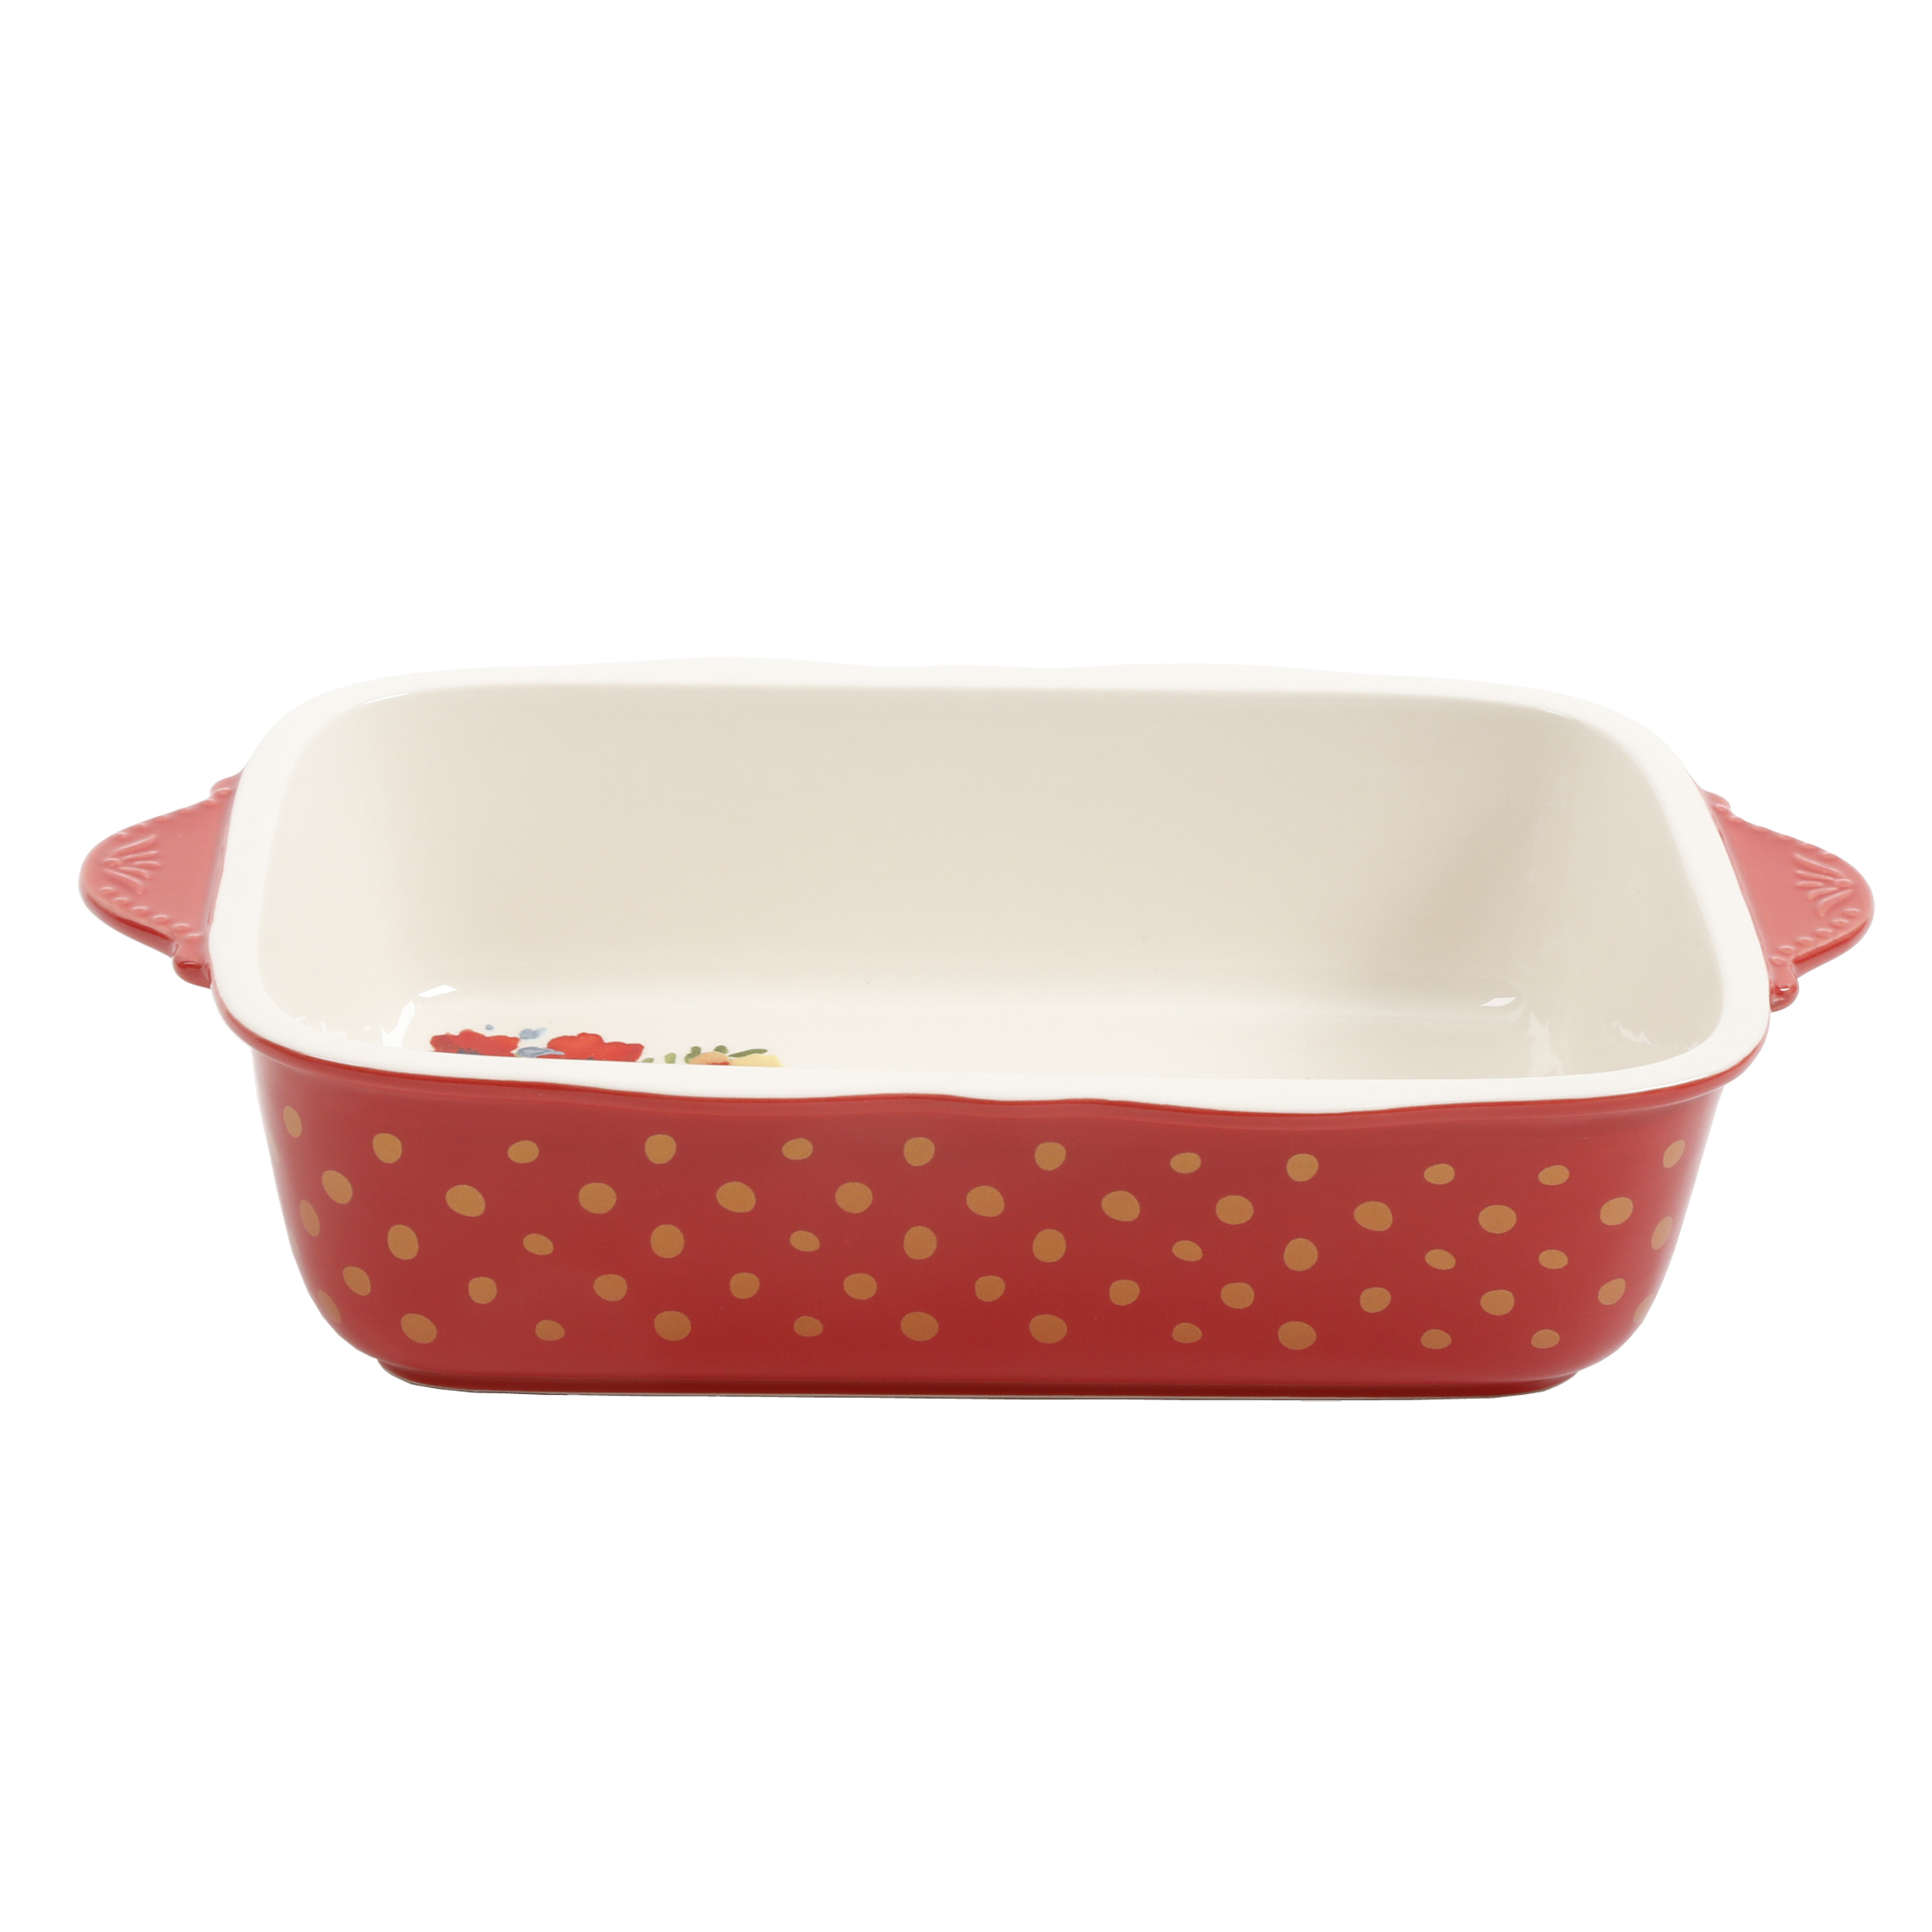 The Pioneer Woman Frost 2-Piece Bakeware Set - image 4 of 7